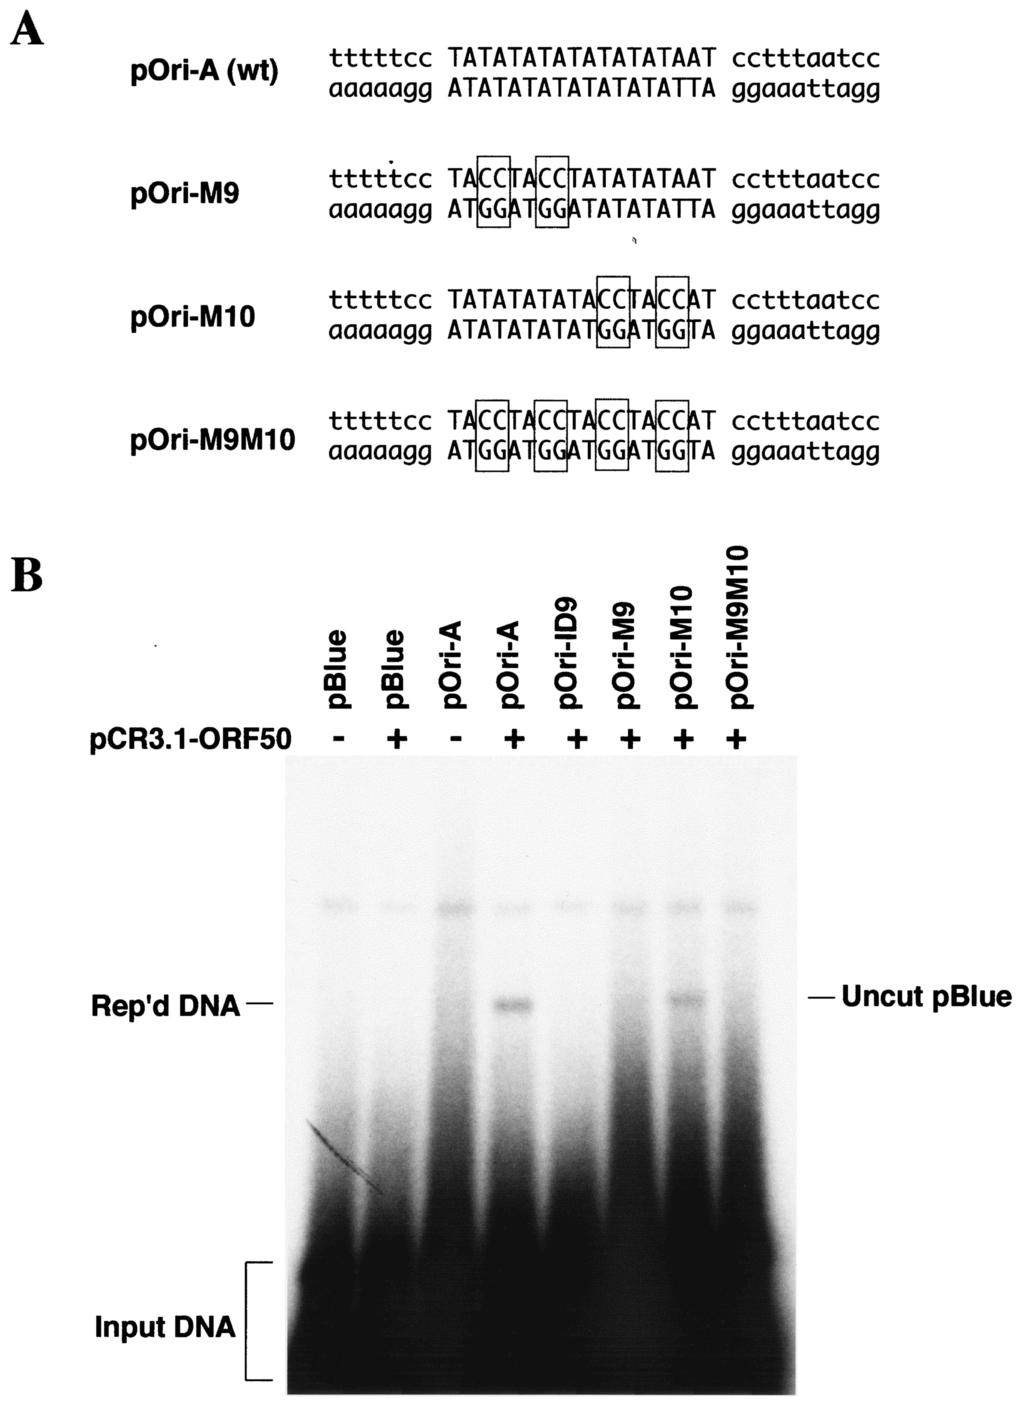 8622 WANG ET AL. J. VIROL. FIG. 4. The 18-bp AT palindrome is essential for KSHV ori-lyt replication. (A) Nucleotide sequence of the wild-type (wt) 18-bp AT palindrome in the ori-lyt and its mutants.